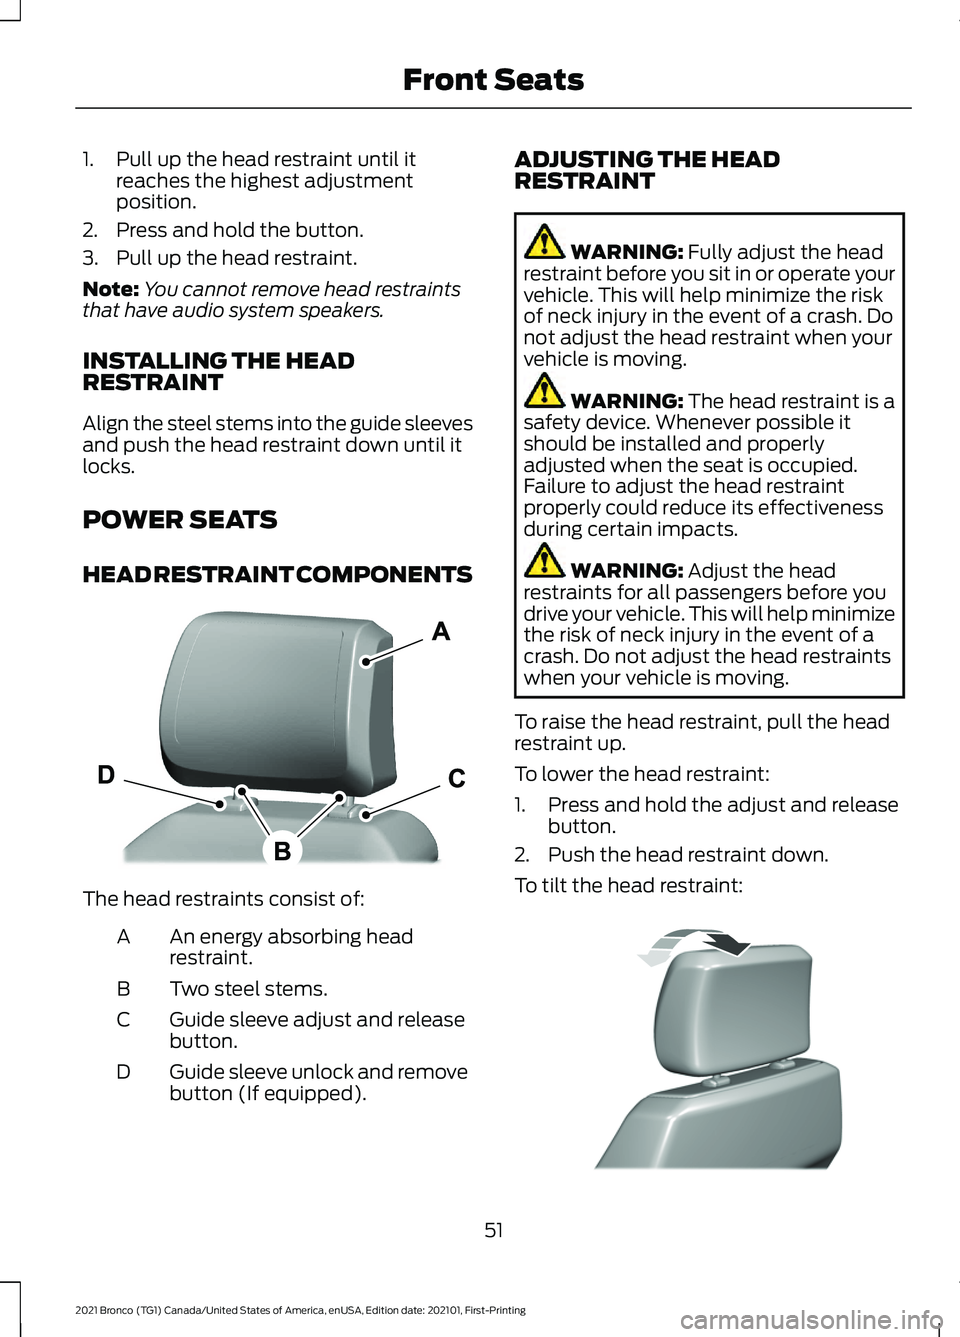 FORD BRONCO 2021  Warranty Guide 1. Pull up the head restraint until it
reaches the highest adjustment
position.
2. Press and hold the button.
3. Pull up the head restraint.
Note: You cannot remove head restraints
that have audio sys